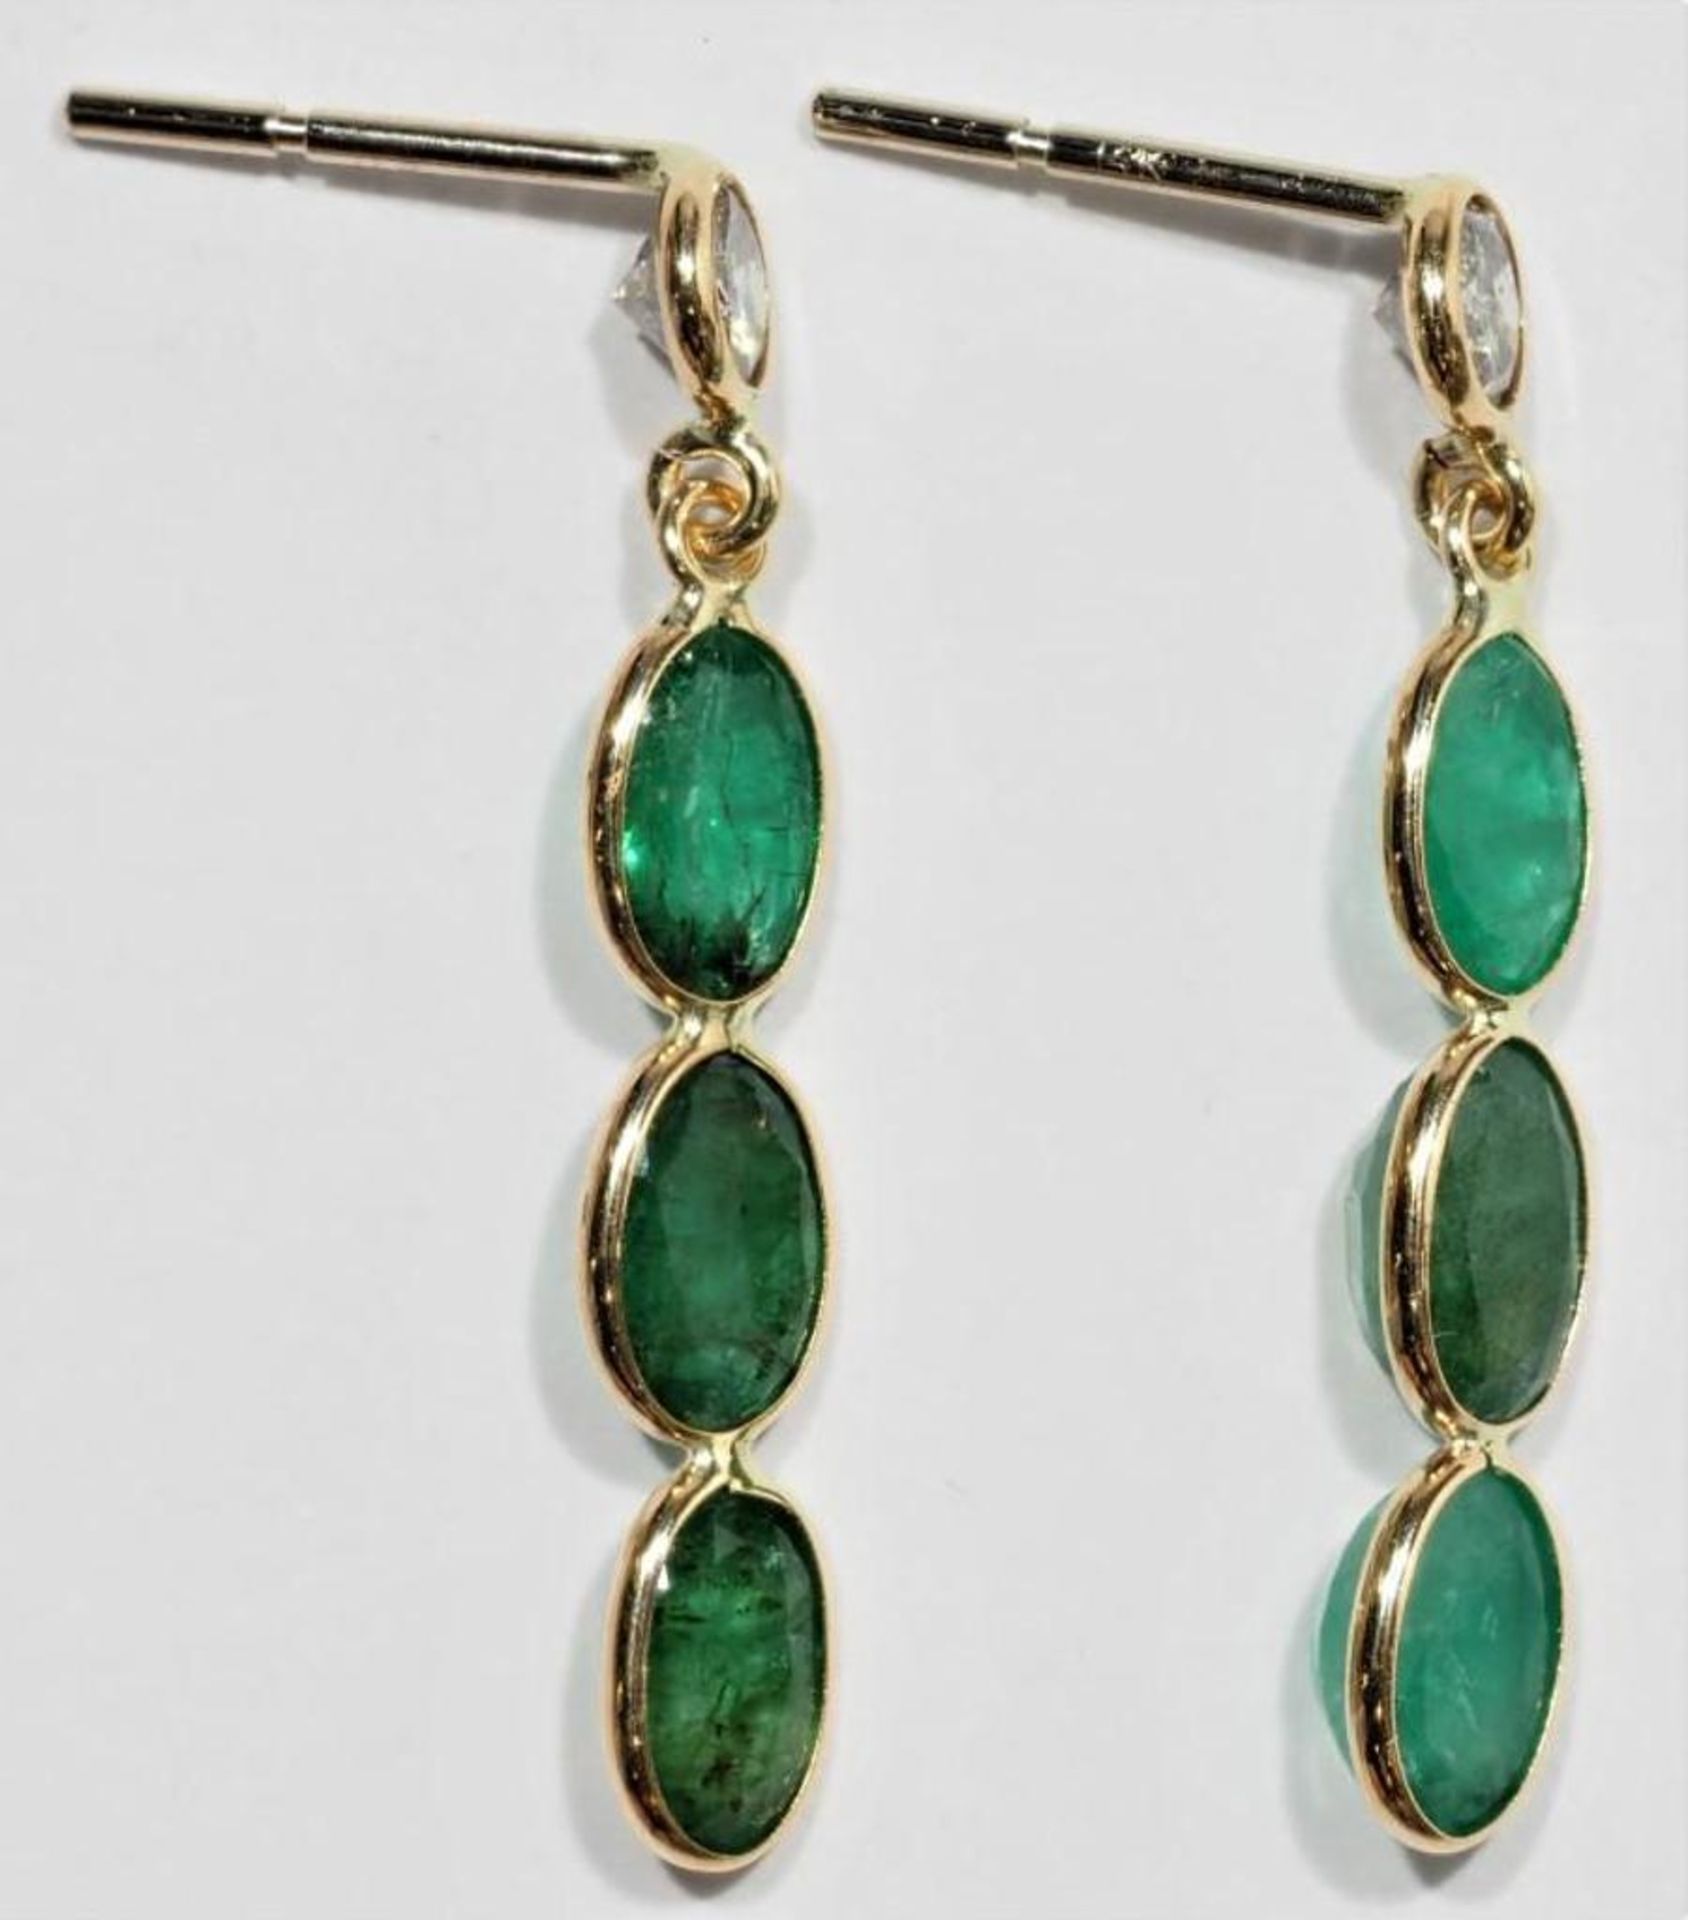 14K Yellow Gold Emerald (2.60ct) and Diamond (0.37ct) Drop Earrings. Insurance Value $3890 - Image 2 of 3